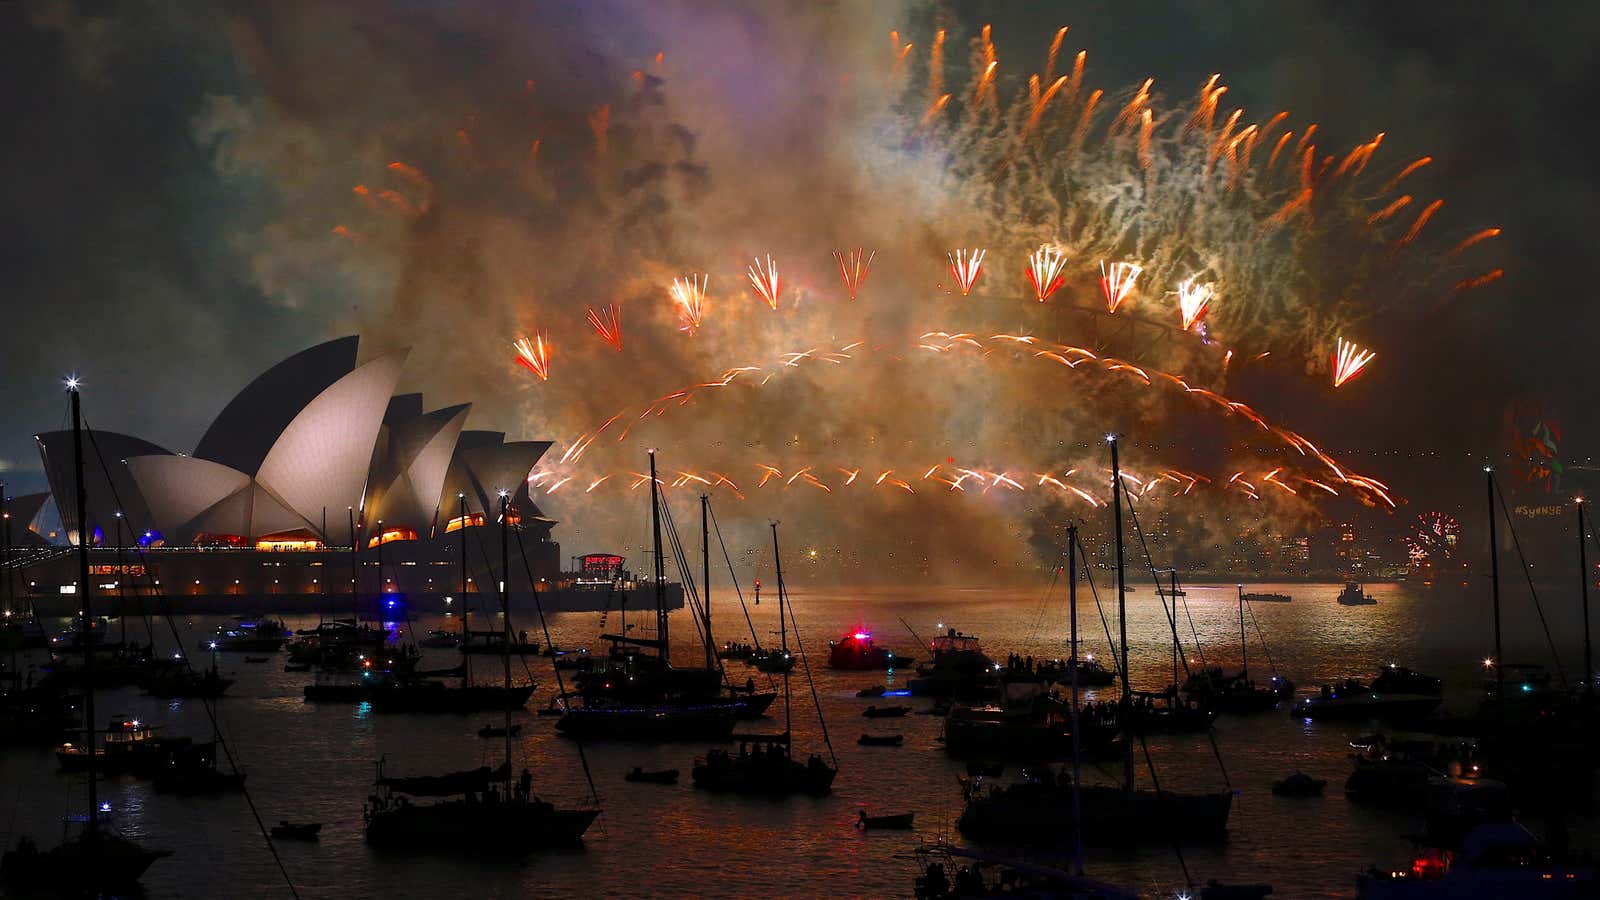 Deputy premier John Barilaro, as well as 250 thousand people, called for cancelling the 2019 Sydney fireworks.